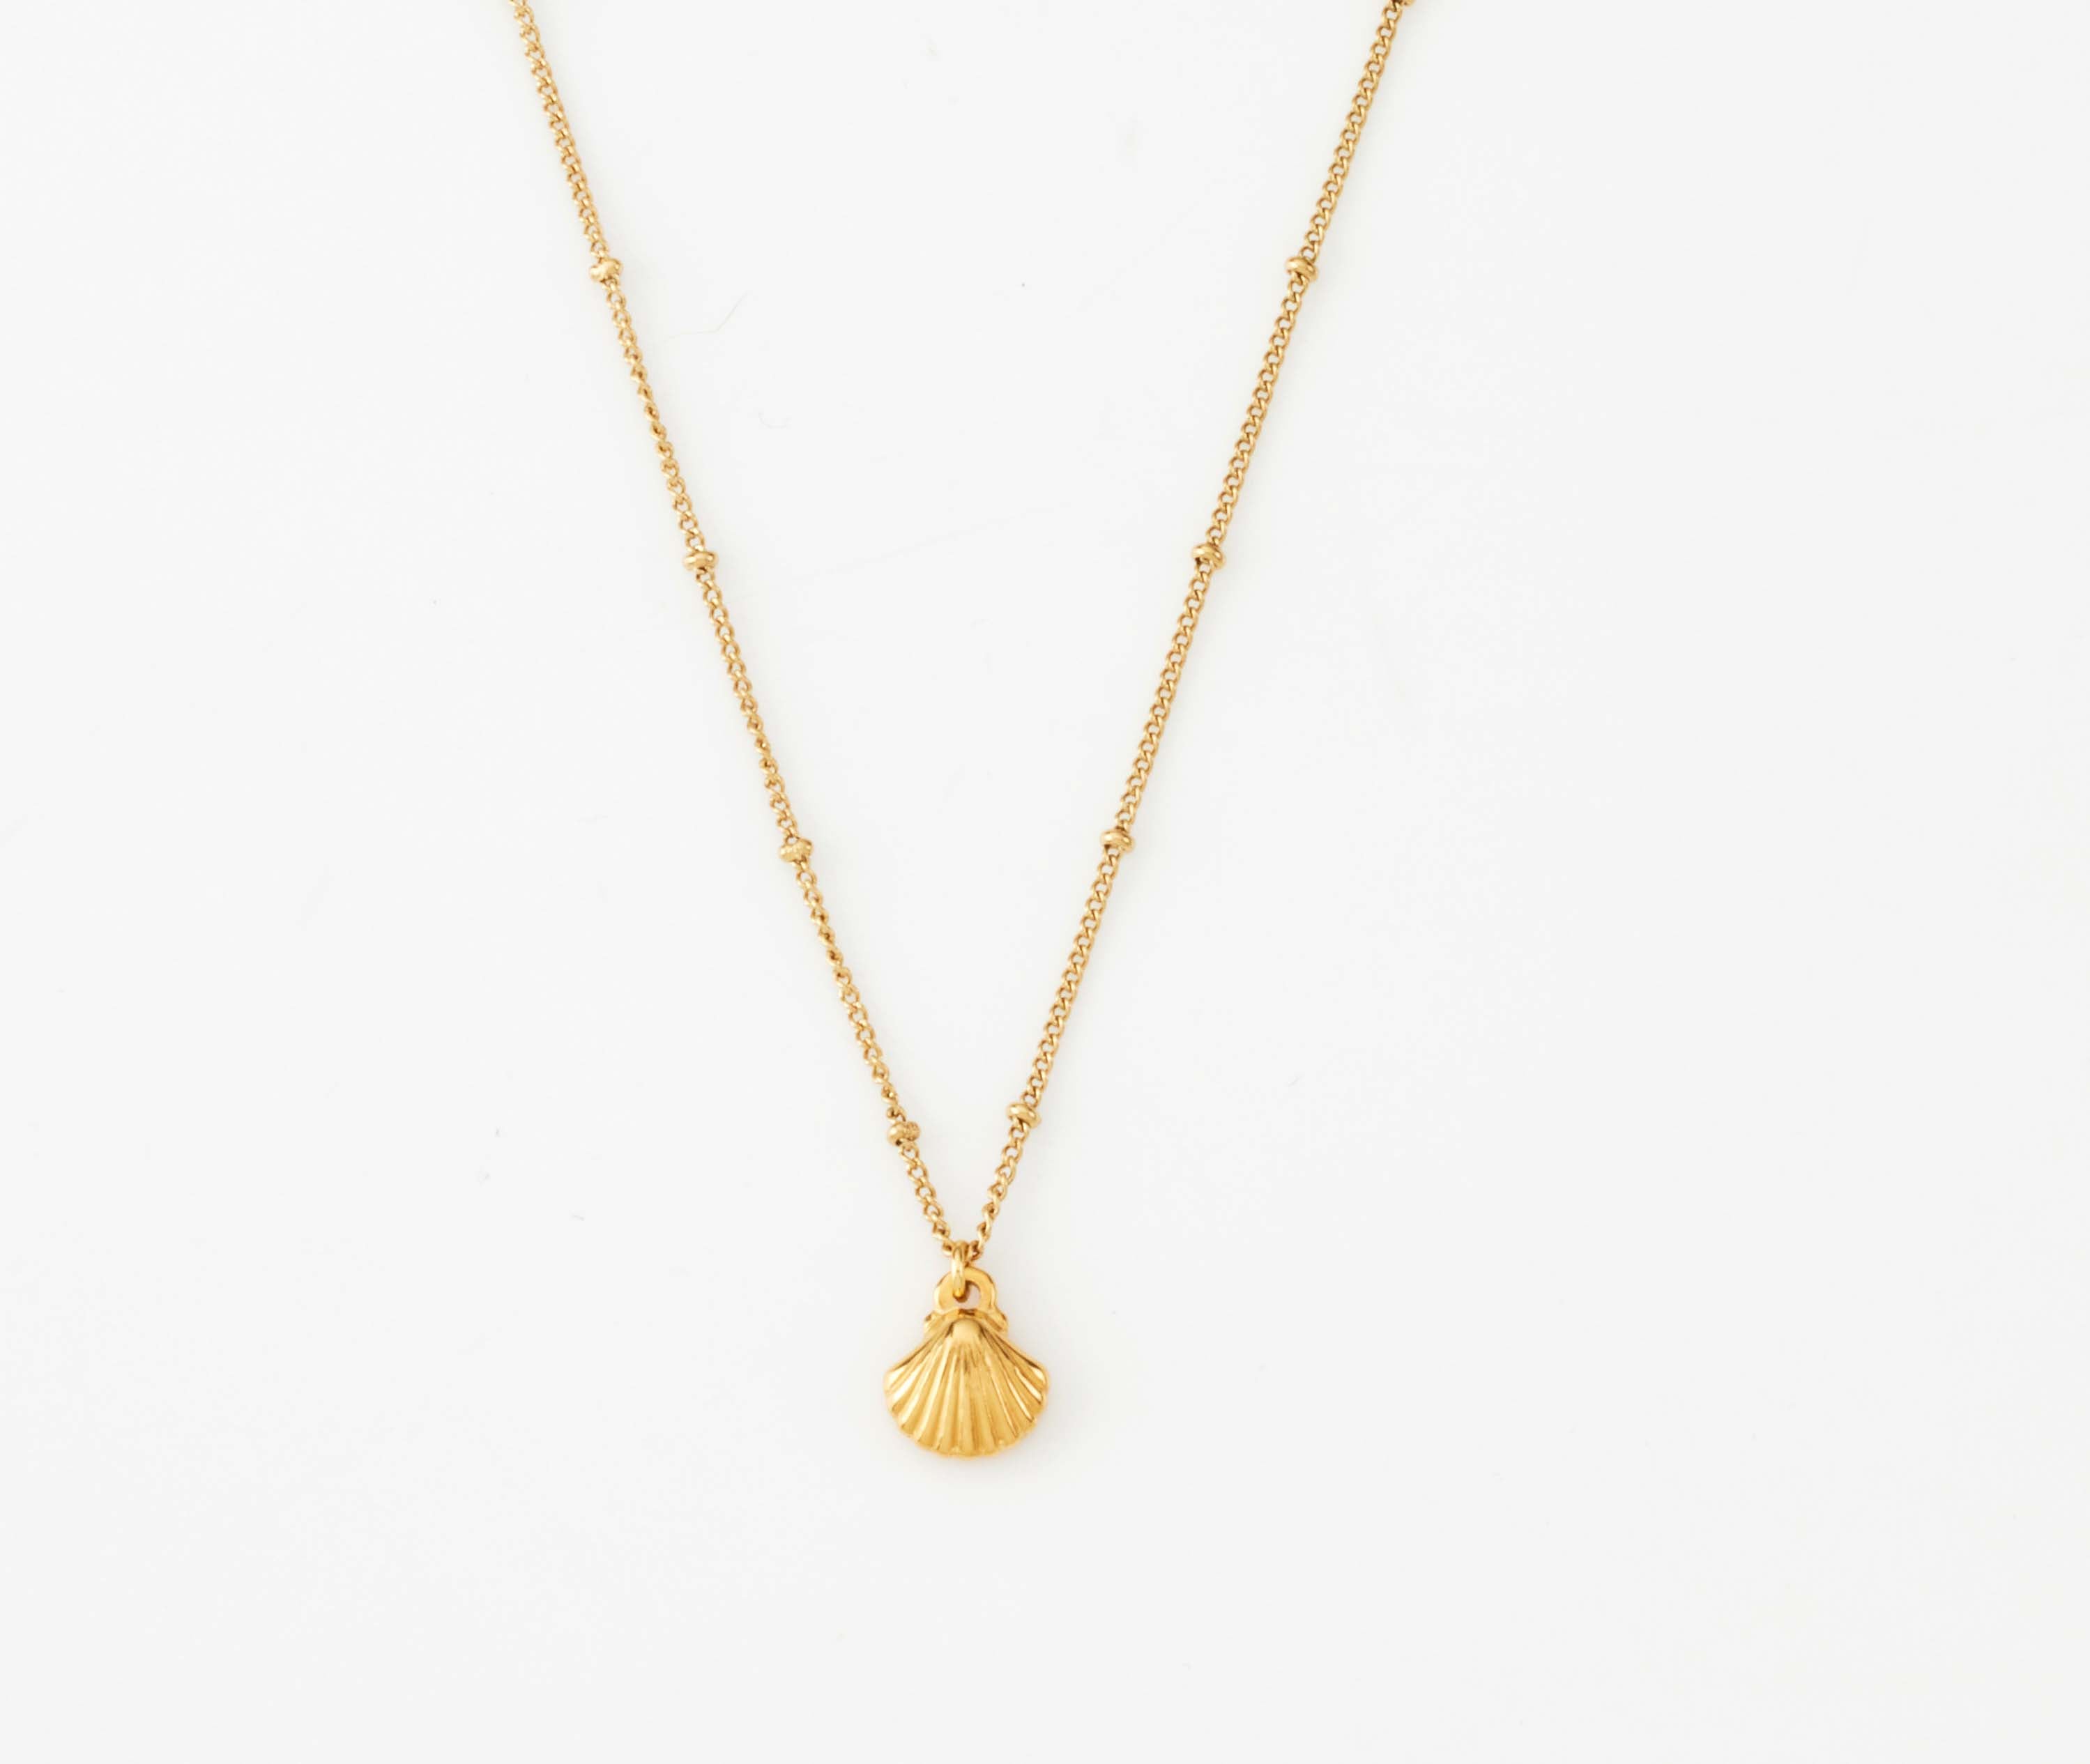 Abigail - 18k Gold Shell Necklace - Ocean Wave Jewelry